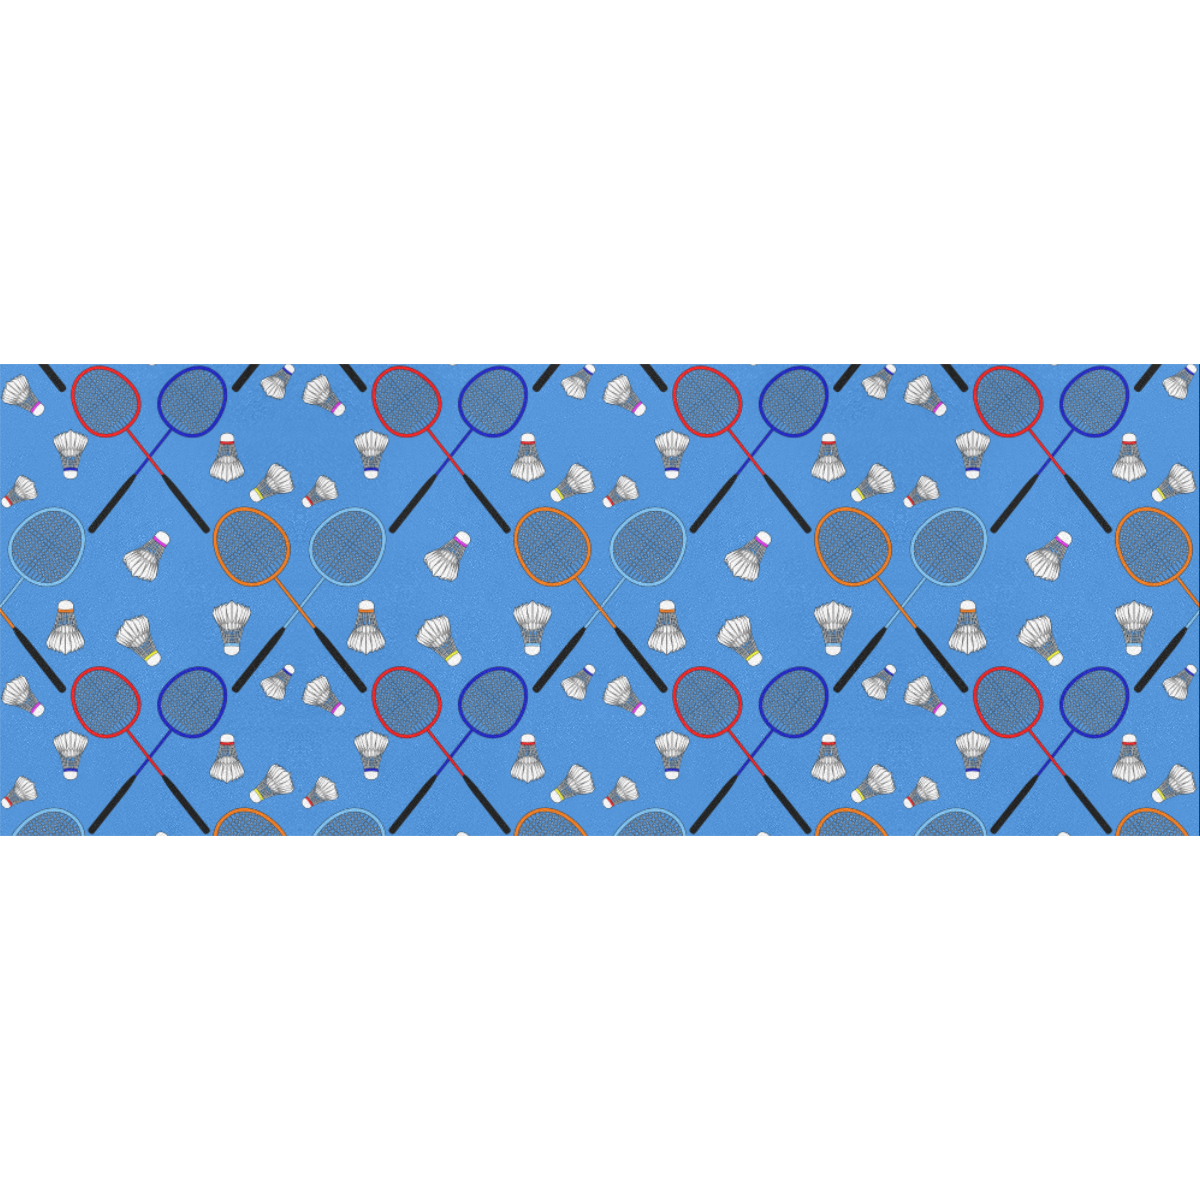 Badminton Rackets and Shuttlecocks Pattern Sports Blue Gift Wrapping Paper 58"x 23" (5 Rolls)